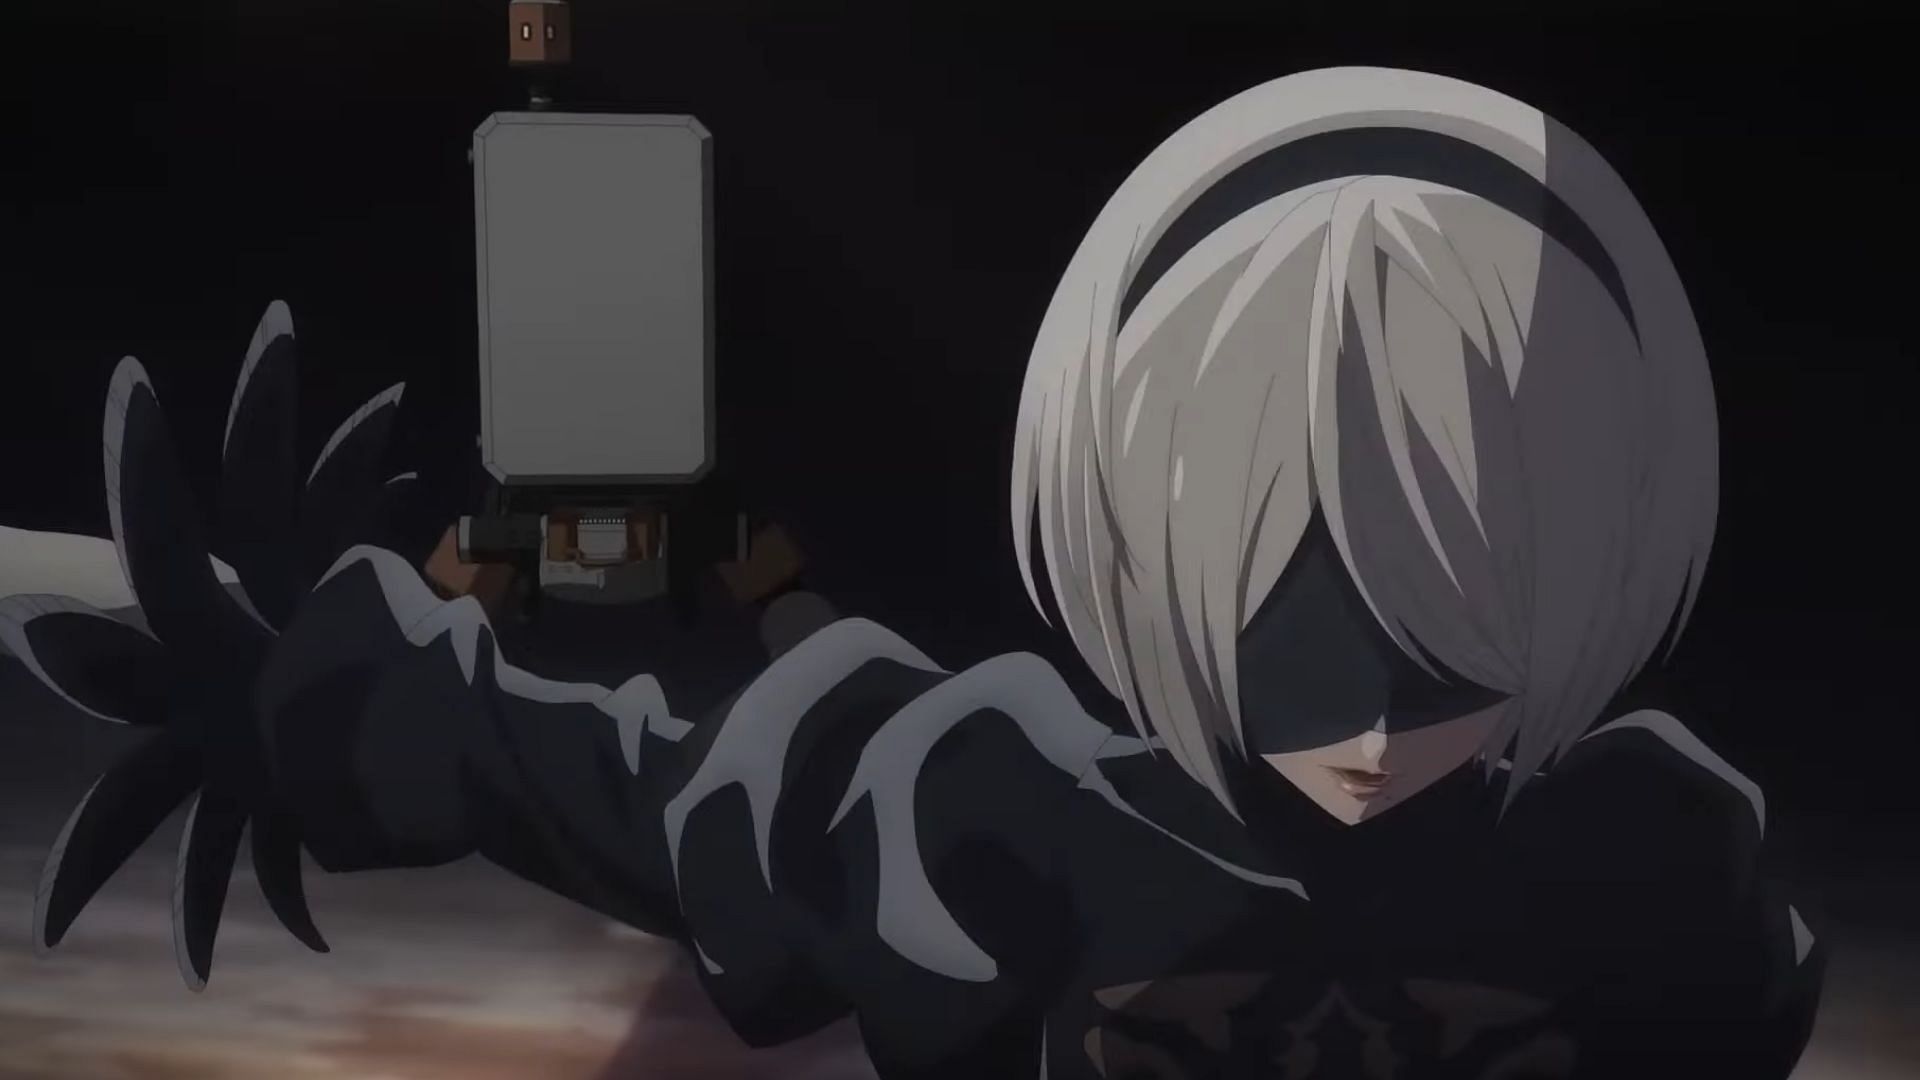 2B as seen in the trailer (Image via A-1 Pictures)